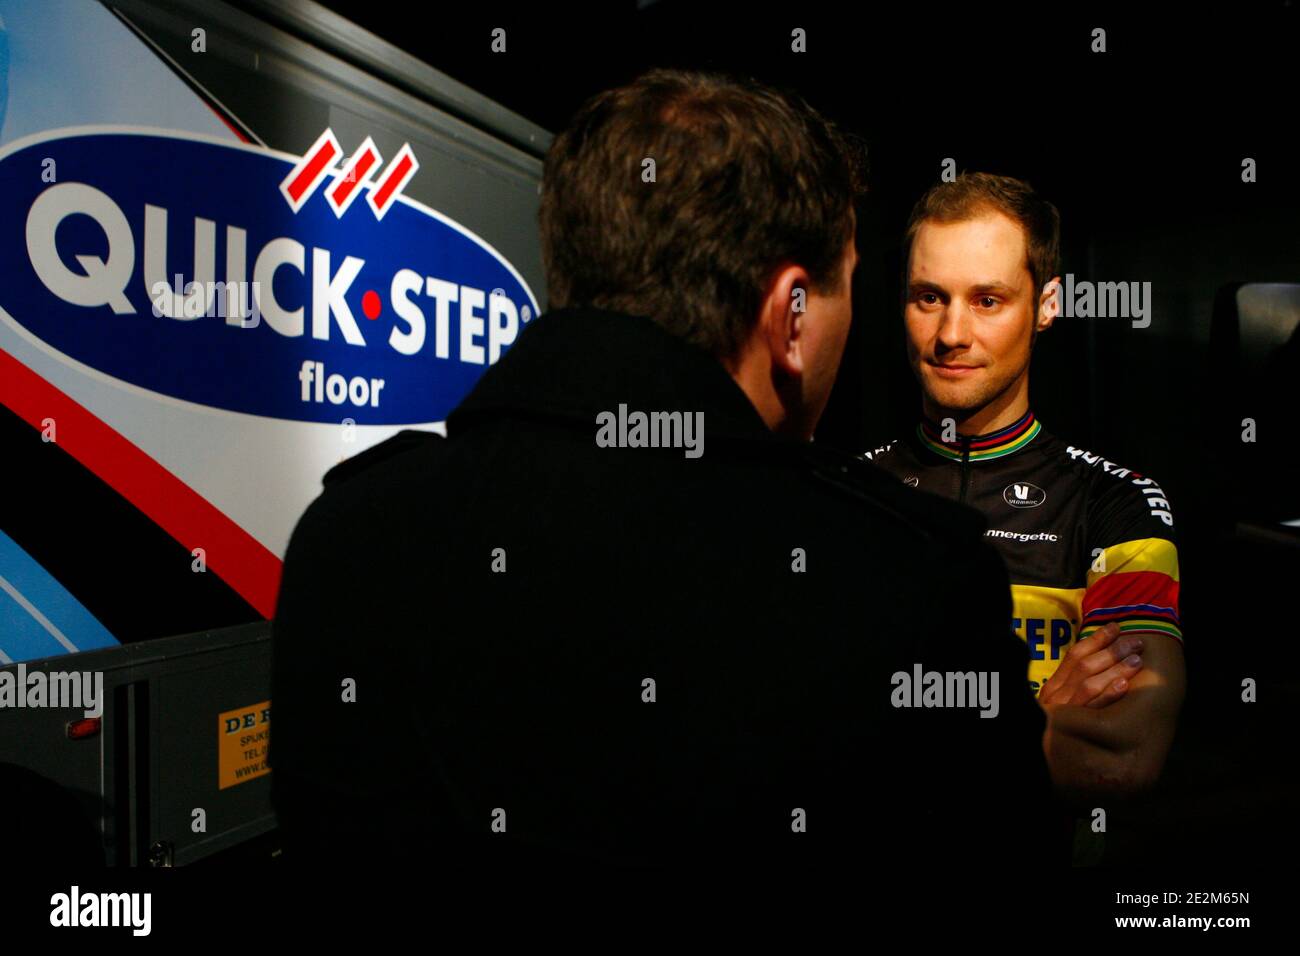 Team leader Tom Boonen during the presentation of the belgian Quick Step cycling team for 2010 season in Courtrai, Belgium on january 22, 2010. Photo by Mikael LIbert/ABACAPRESS.COM Stock Photo